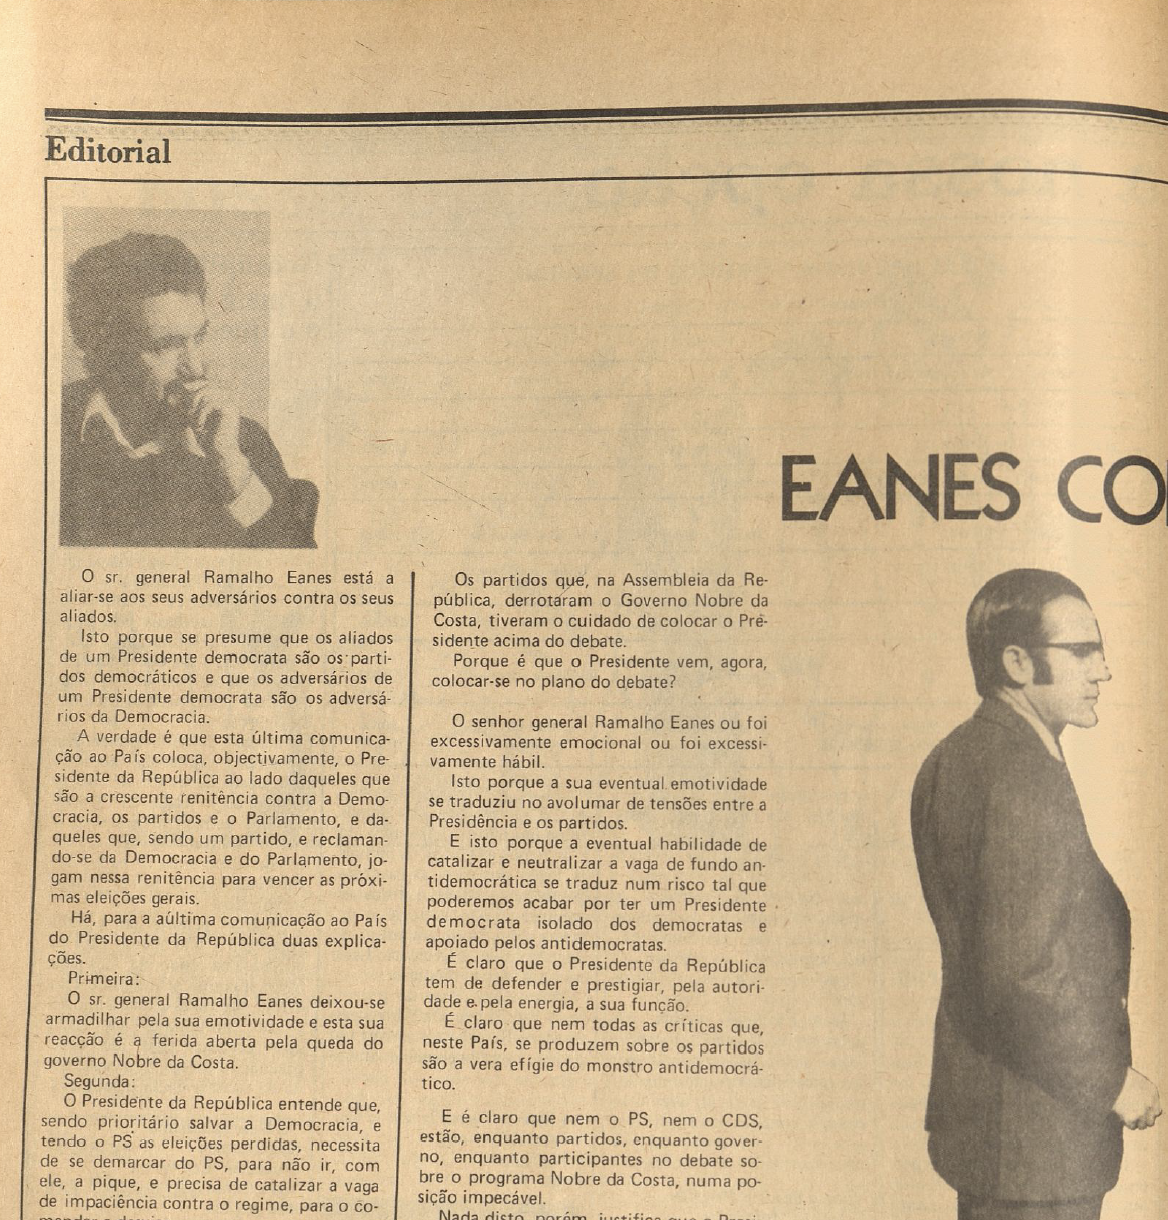 "Eanes contra Eanes"